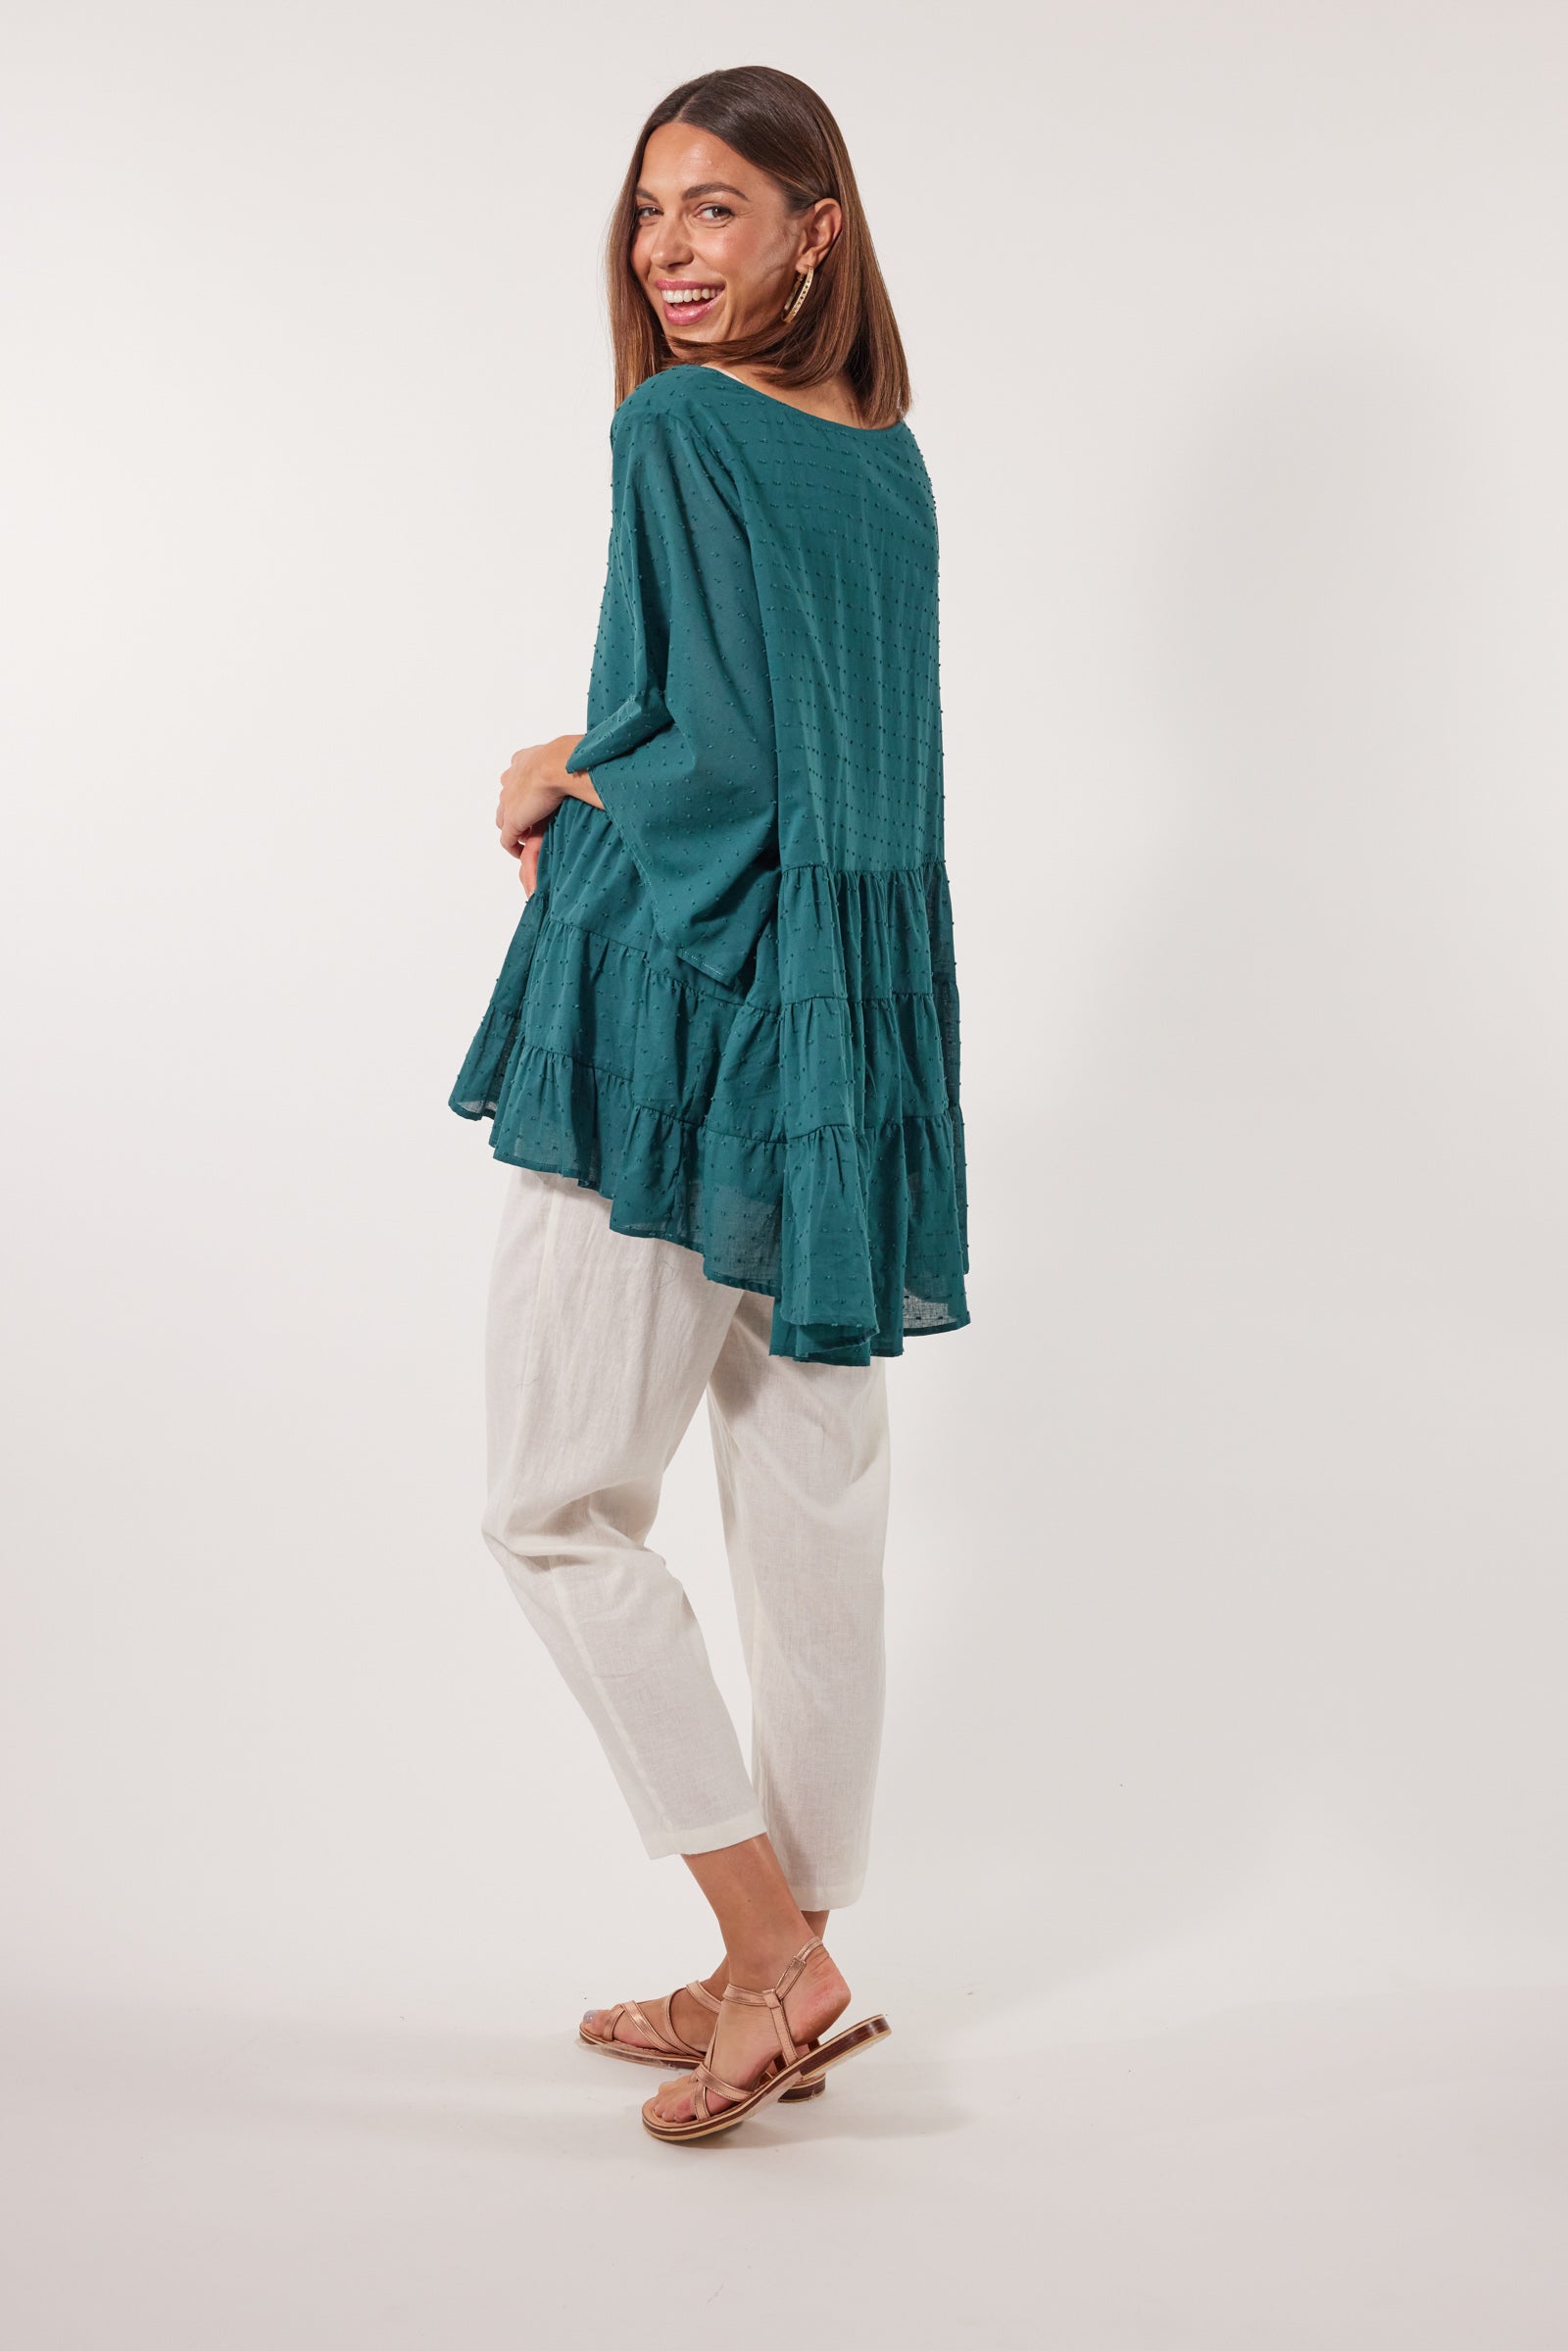 Soiree Relax Top - Teal - Isle of Mine Clothing - Top 3/4 Sleeve One Size